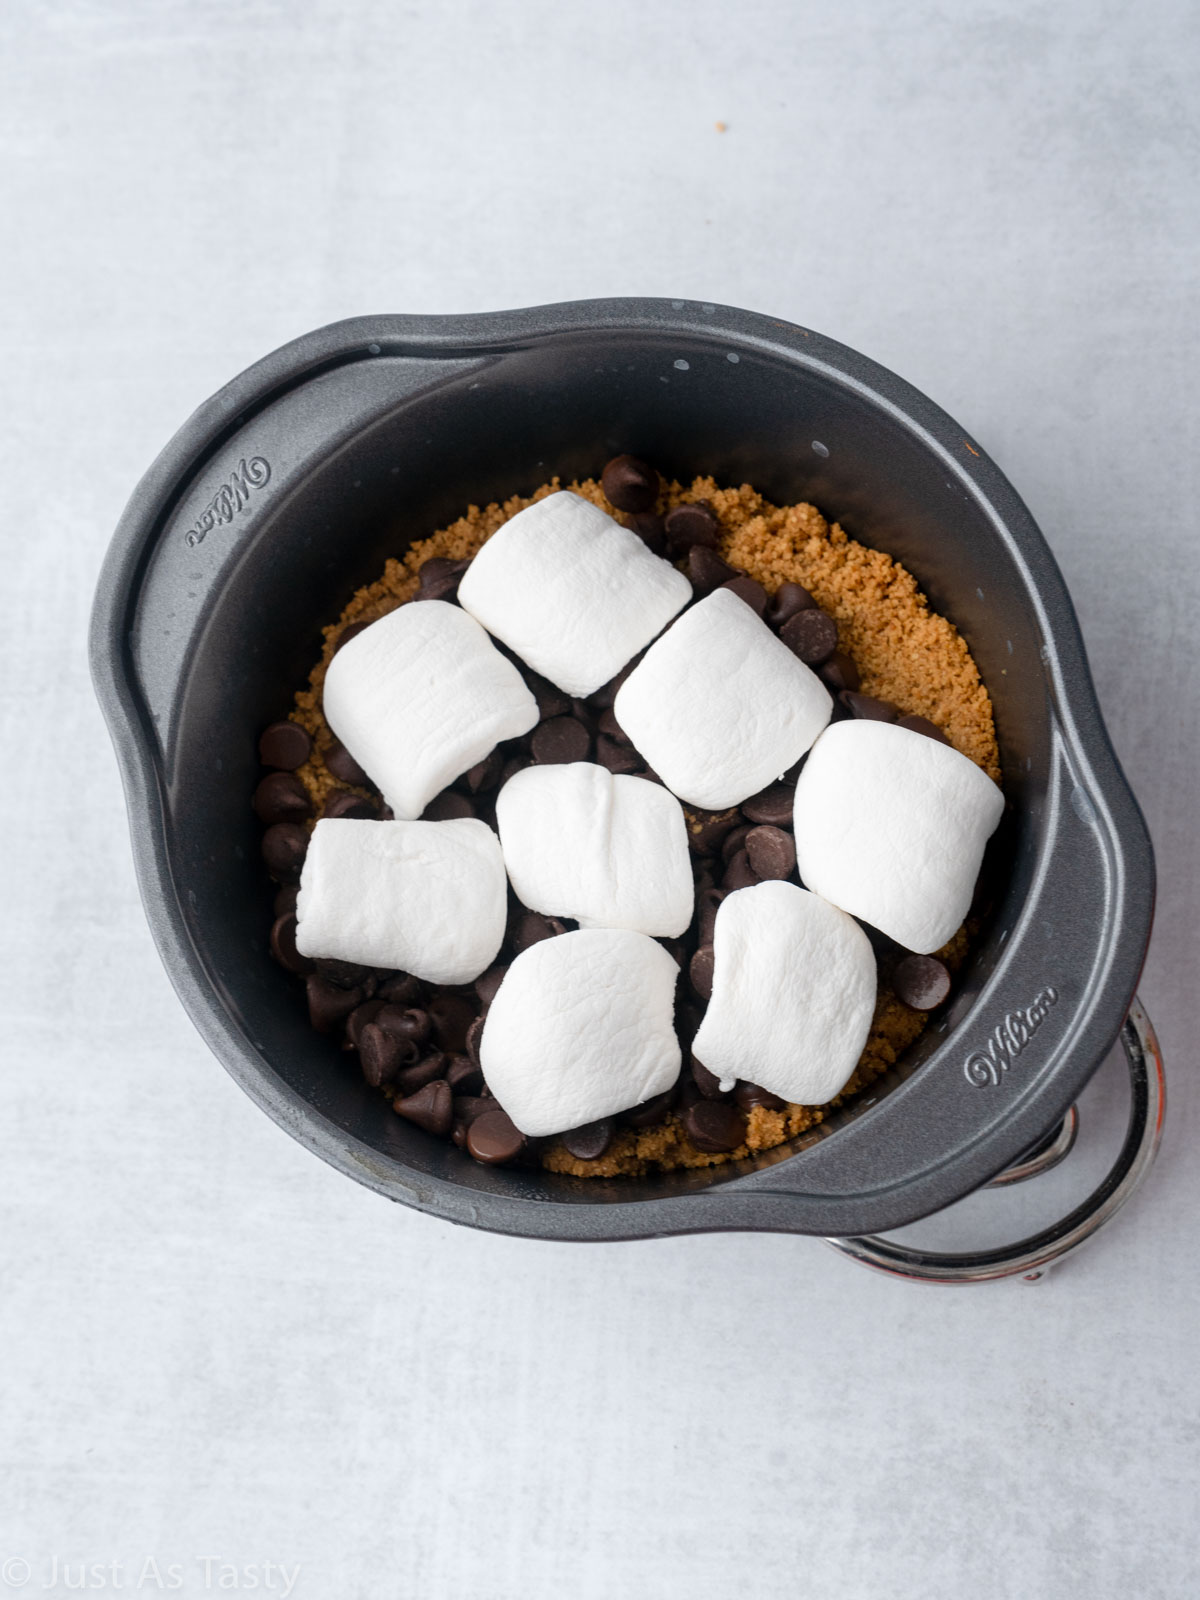 Graham cracker crust topped with chocolate chips and marshmallows in a cake pan.